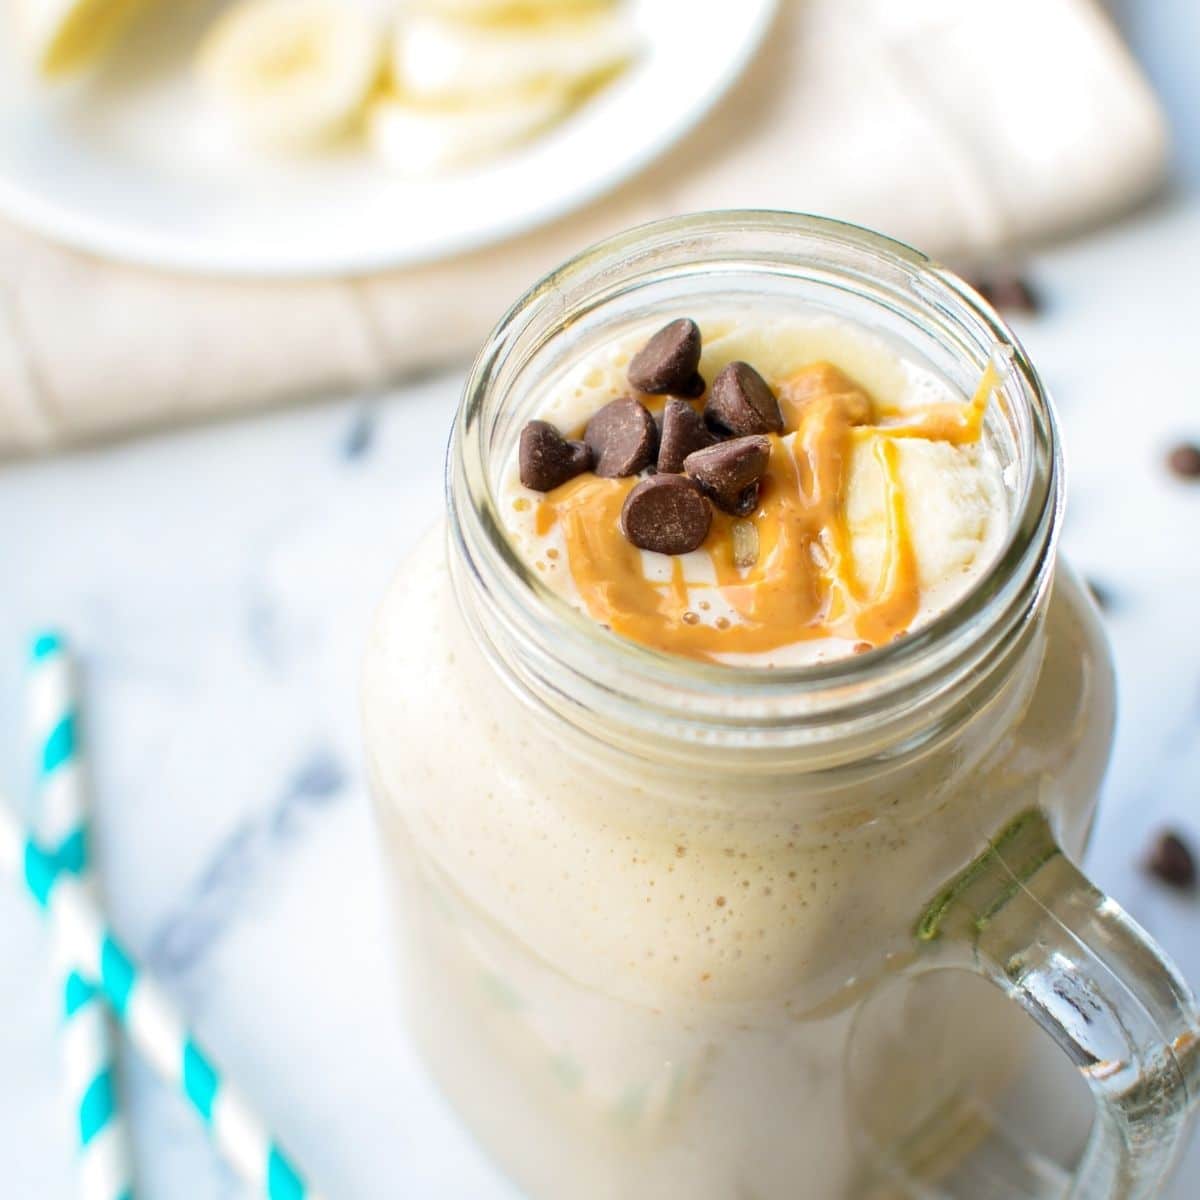 A kefir smoothie with banana and peanut butter, drizzled with peanut butter and a few chocolate chips sprinkled on top.